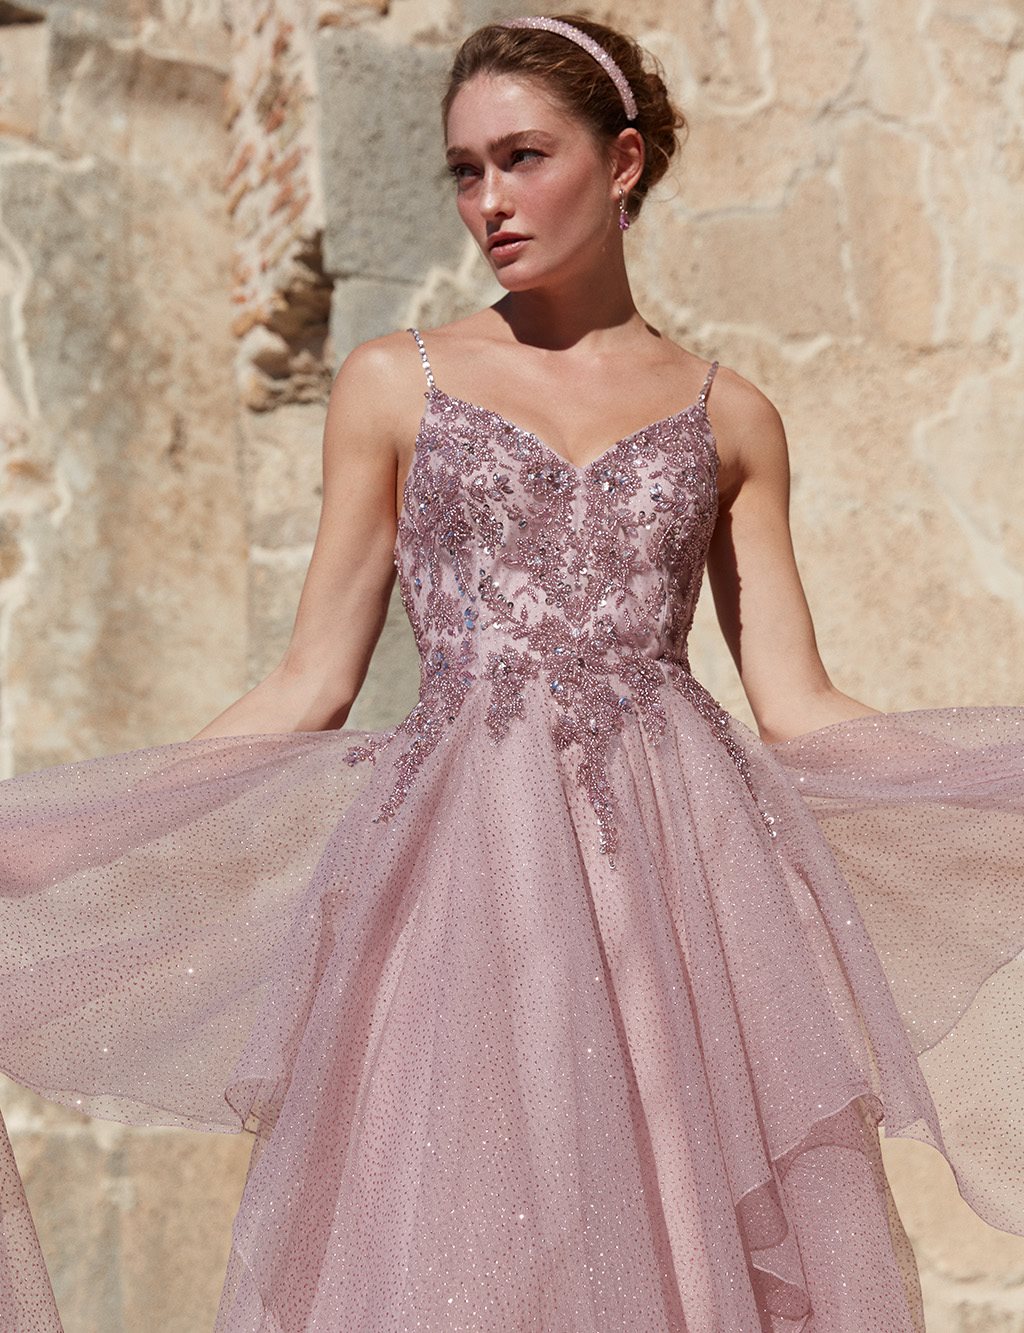 TIARA Thin Straps Embroidered Evening Dress Lilac